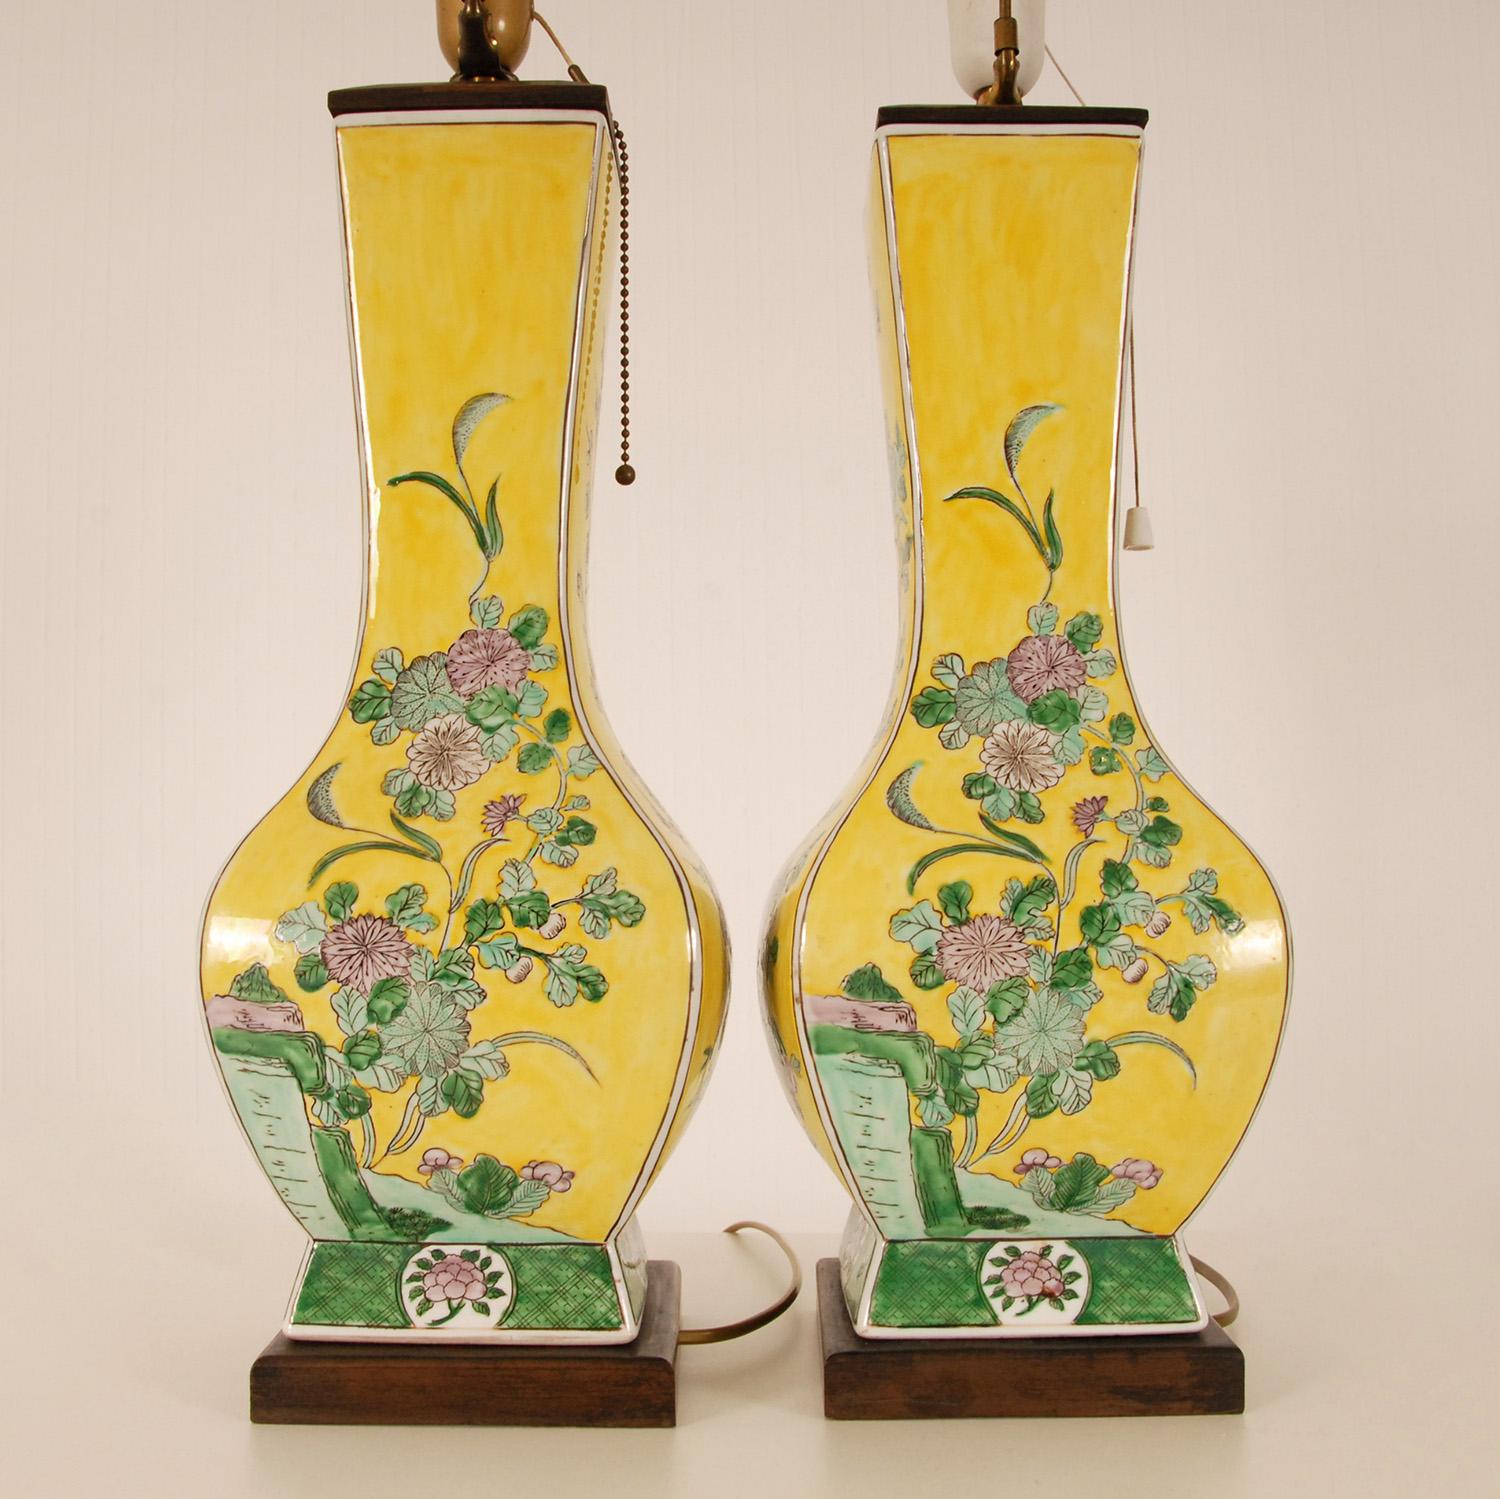 Vintage Ceramic Chinoiserie Lamps Famille Jaune and Famille Verte Table Lamps 2